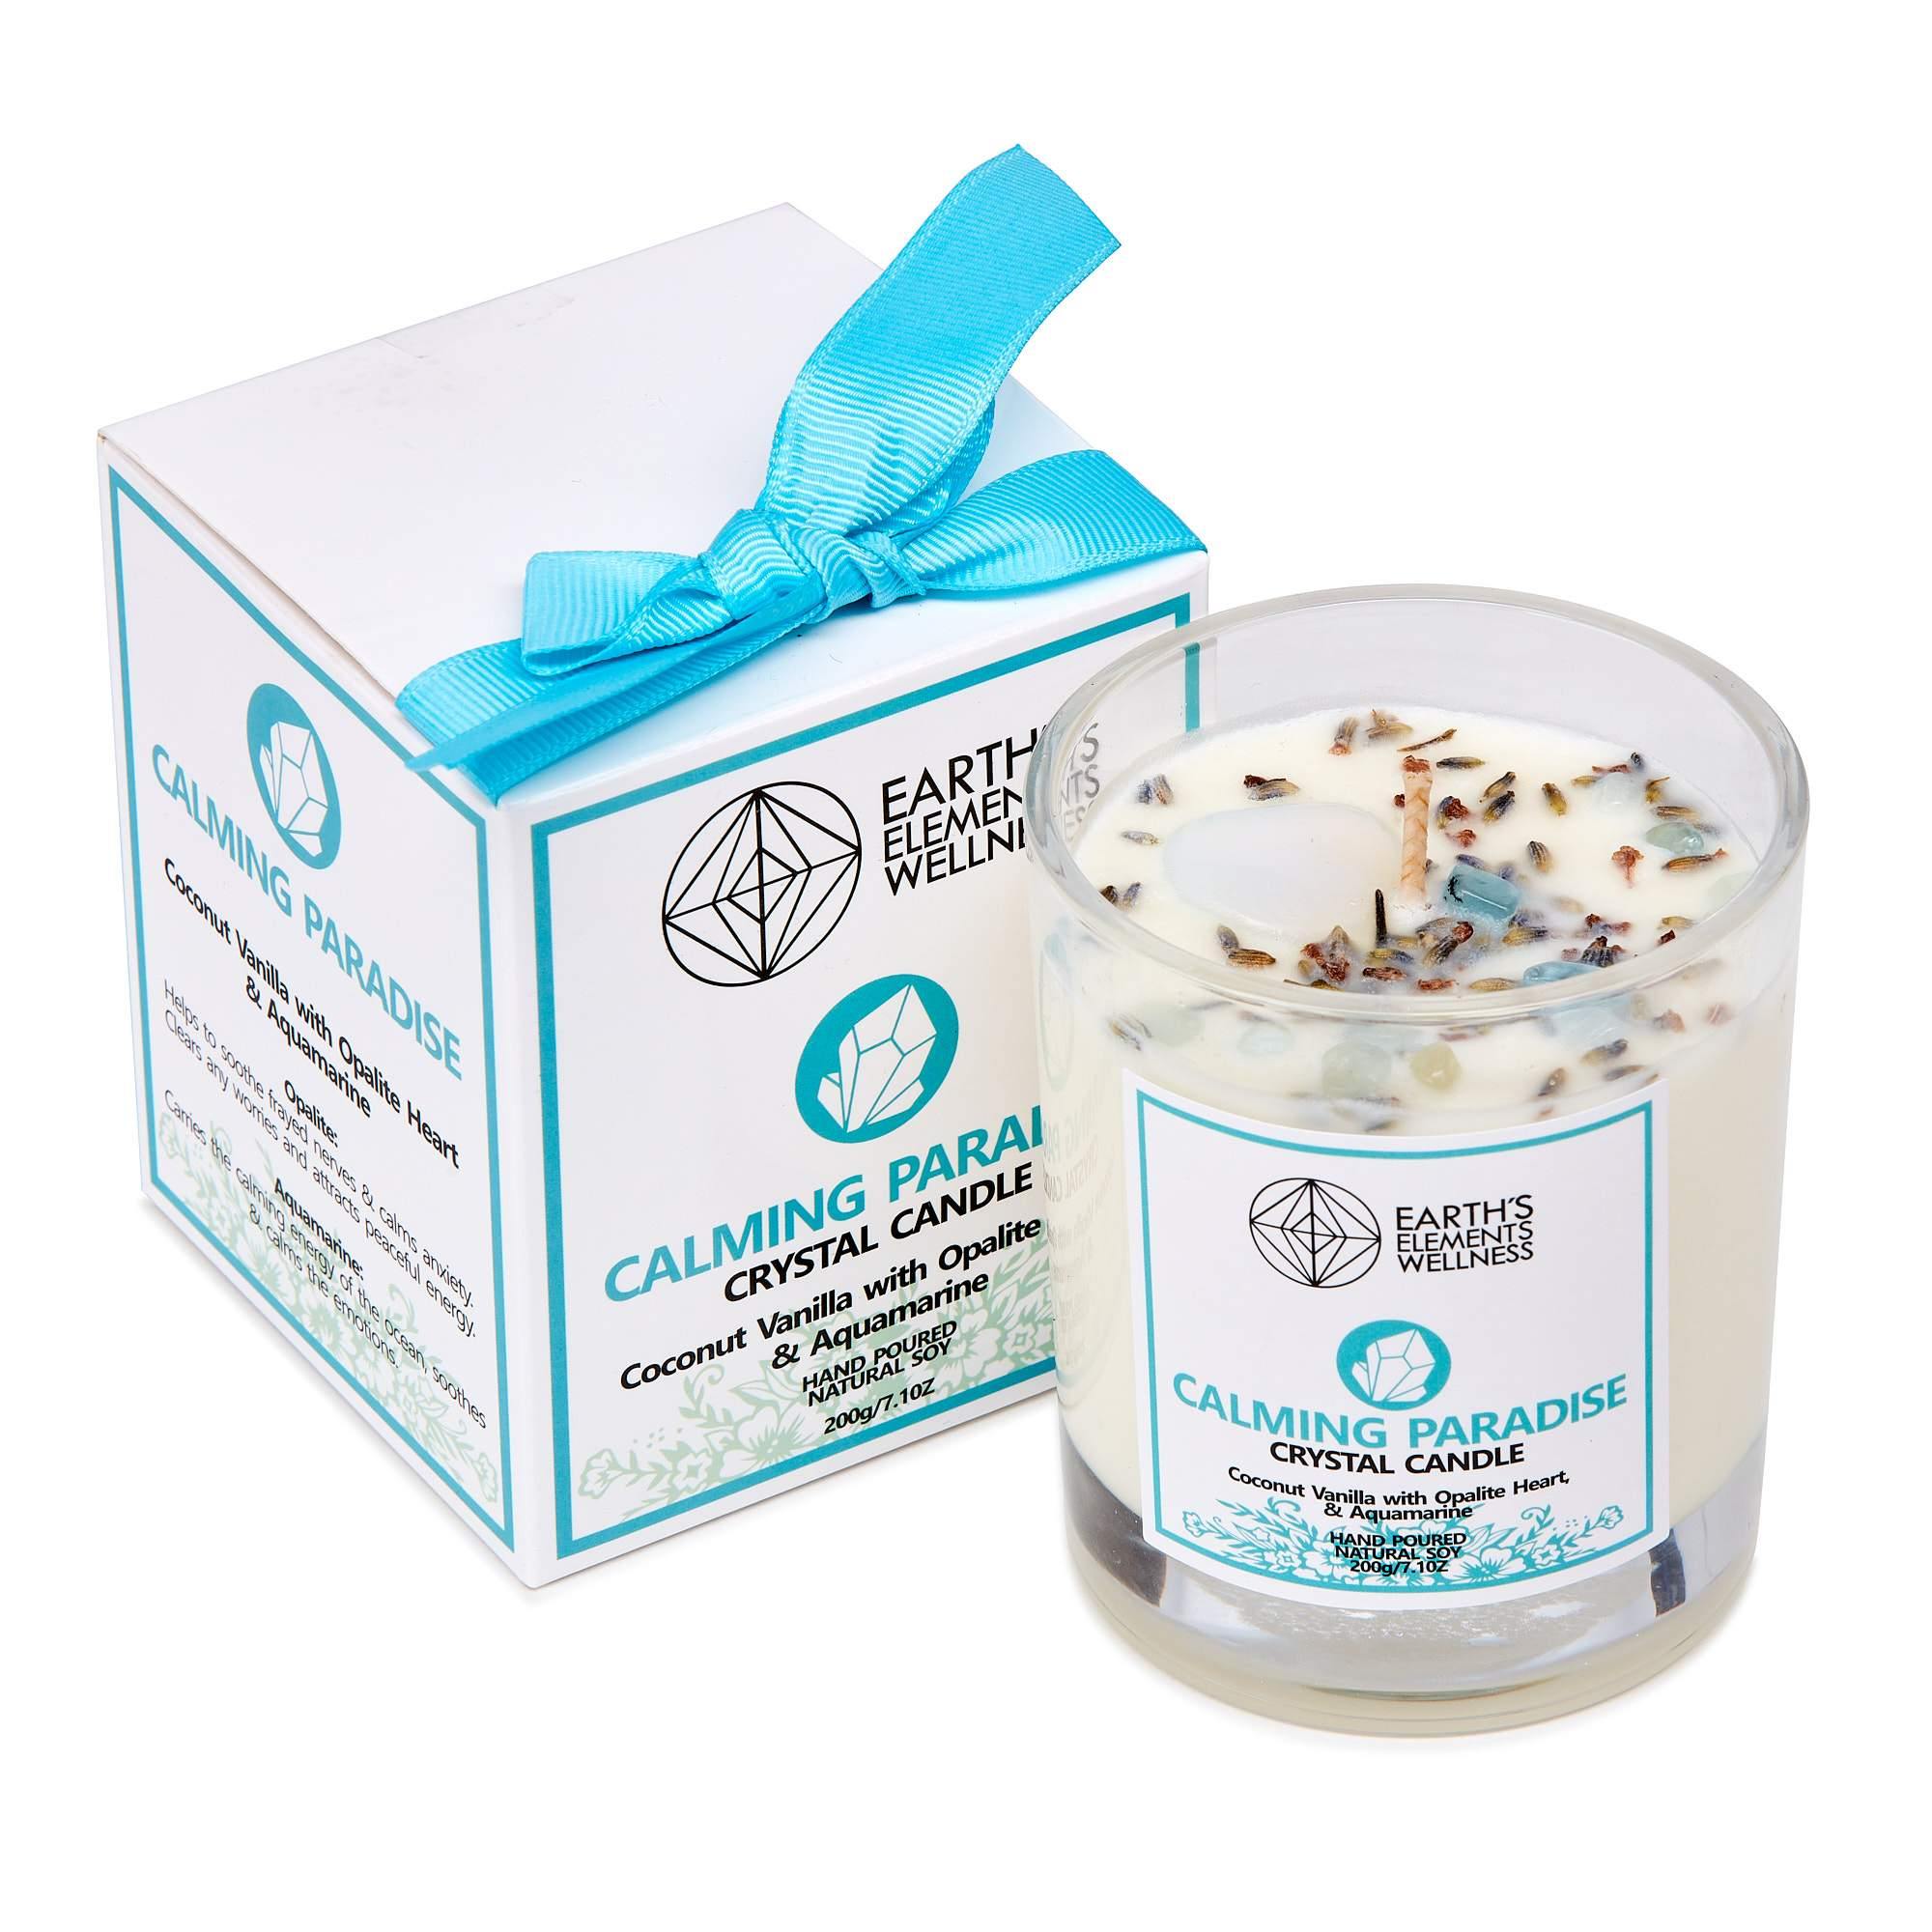 Calming Paradise Crystal Candle - Coconut and Vanilla with an Opalite Heart and Aquamarine in a Hand Poured Natural Soy Candle - The Rutile Ltd